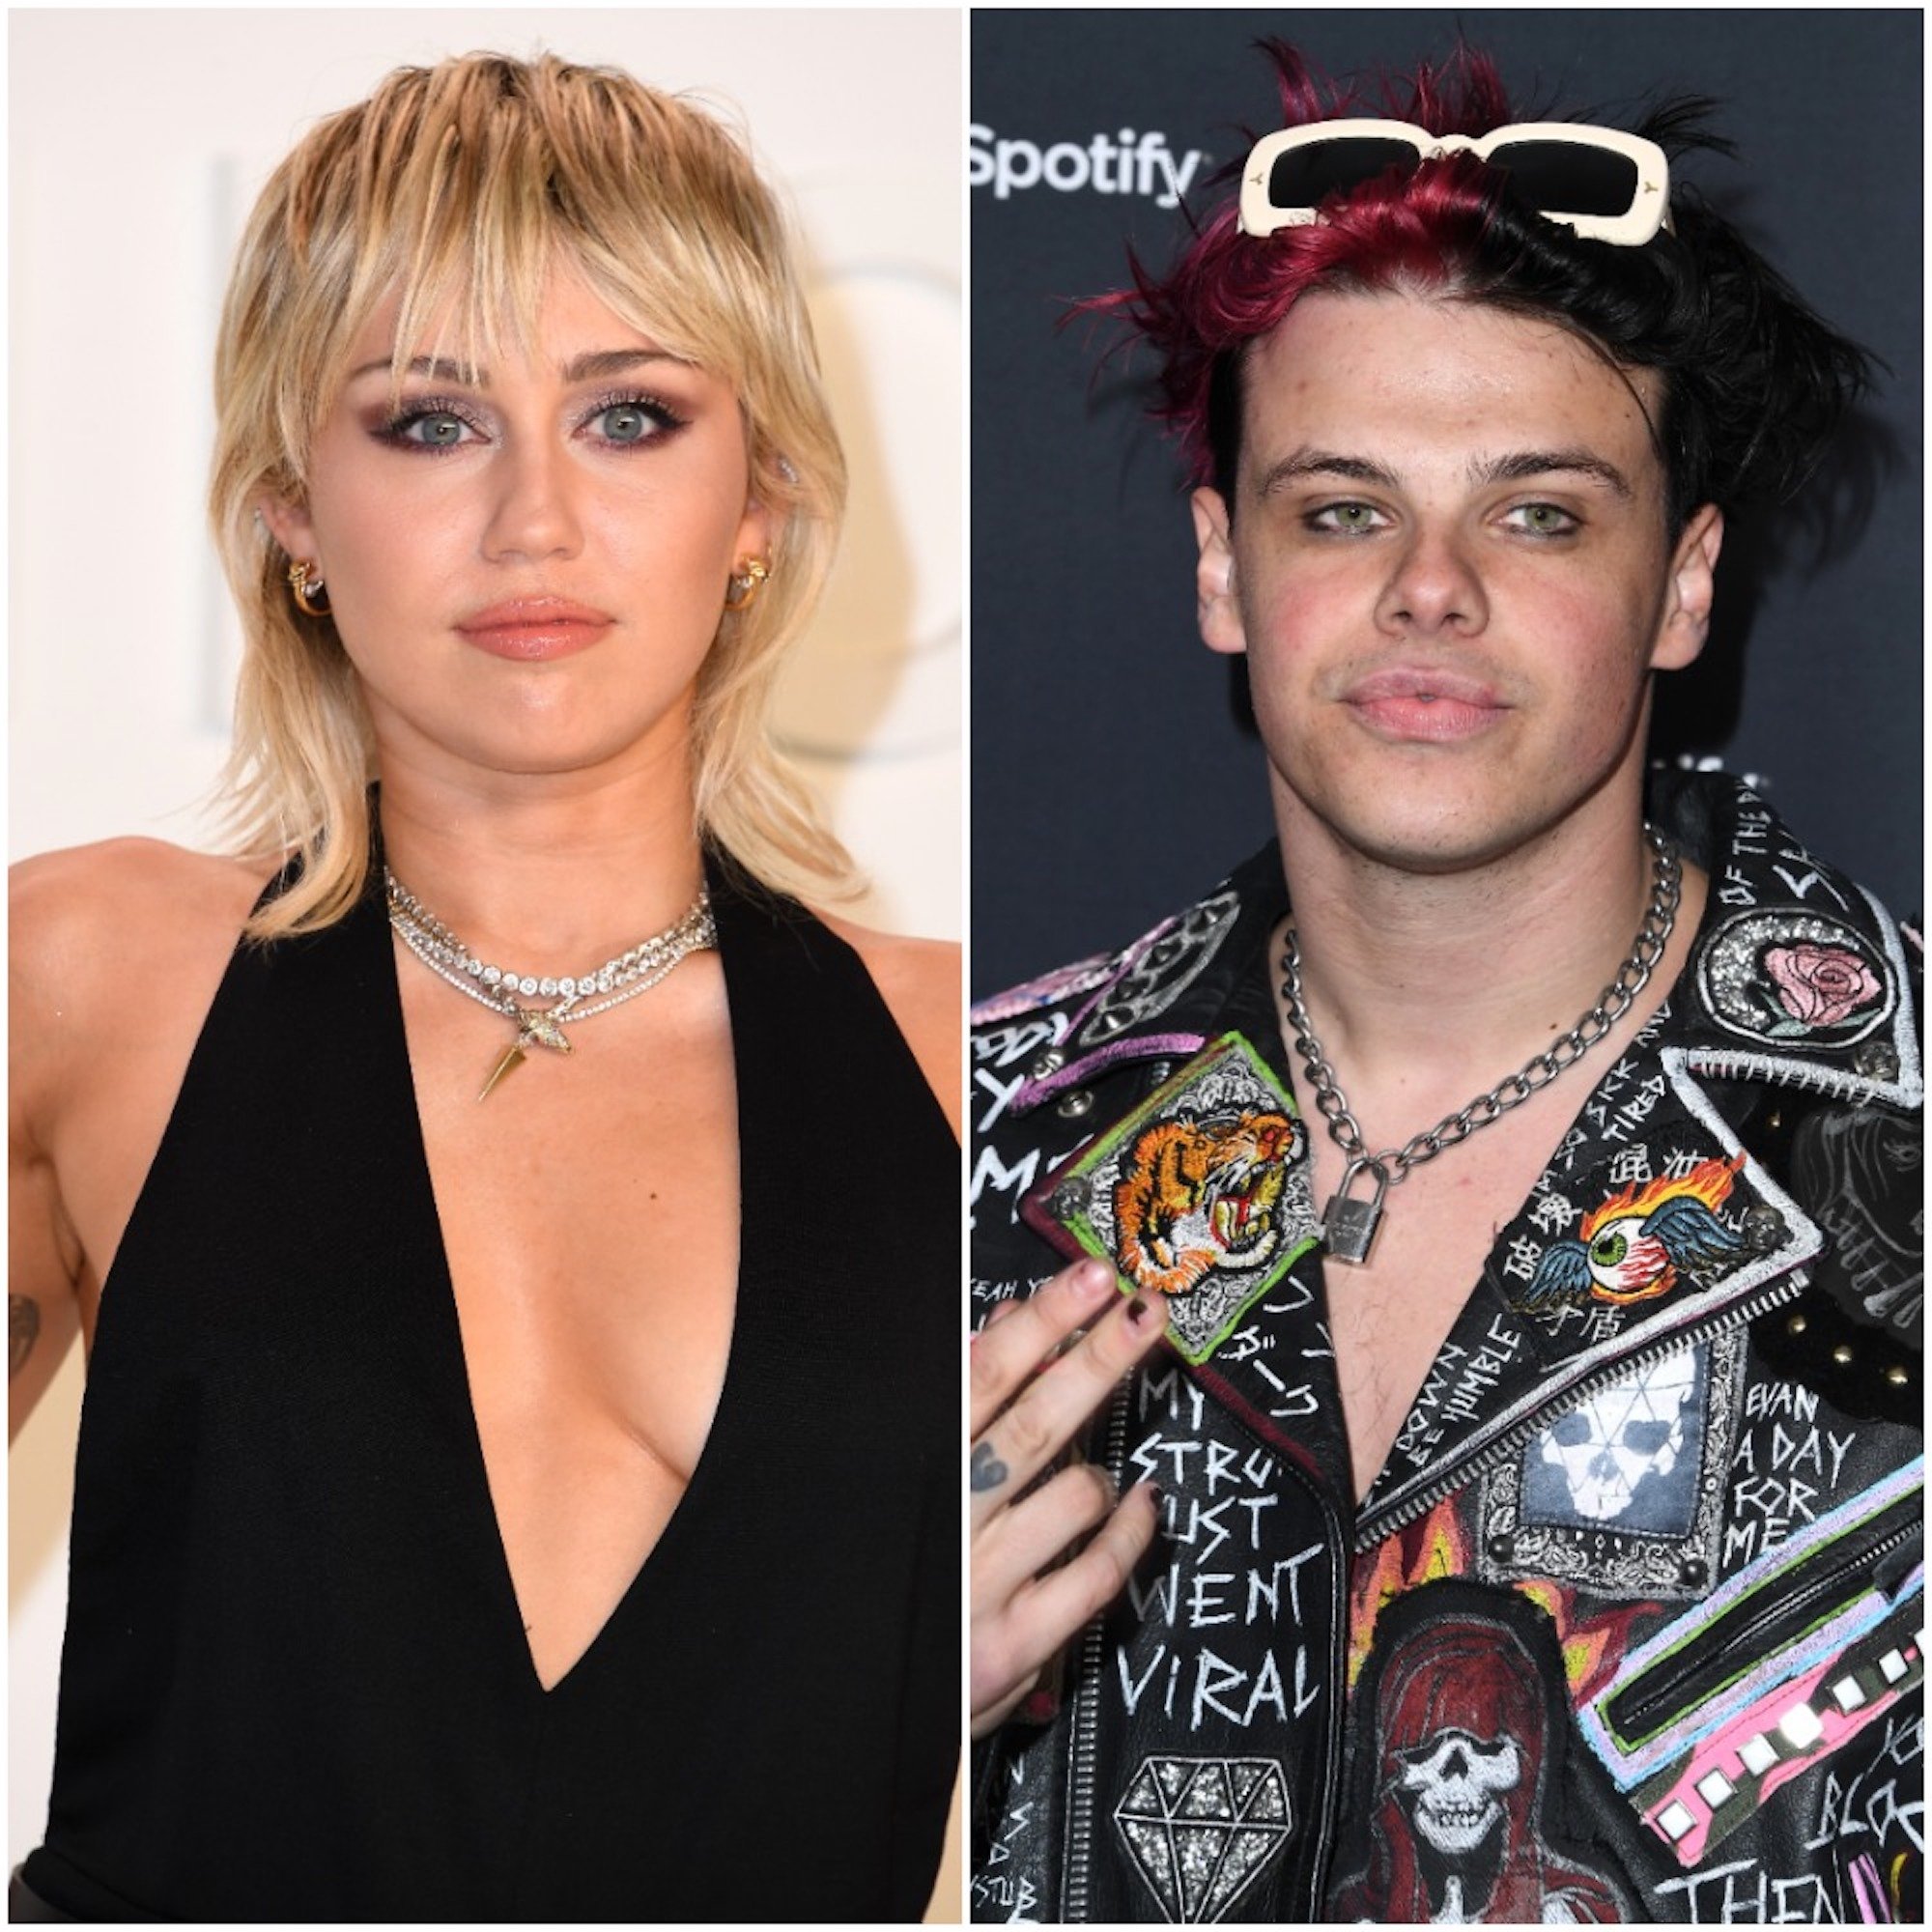 Miley Cyrus and Yungblud